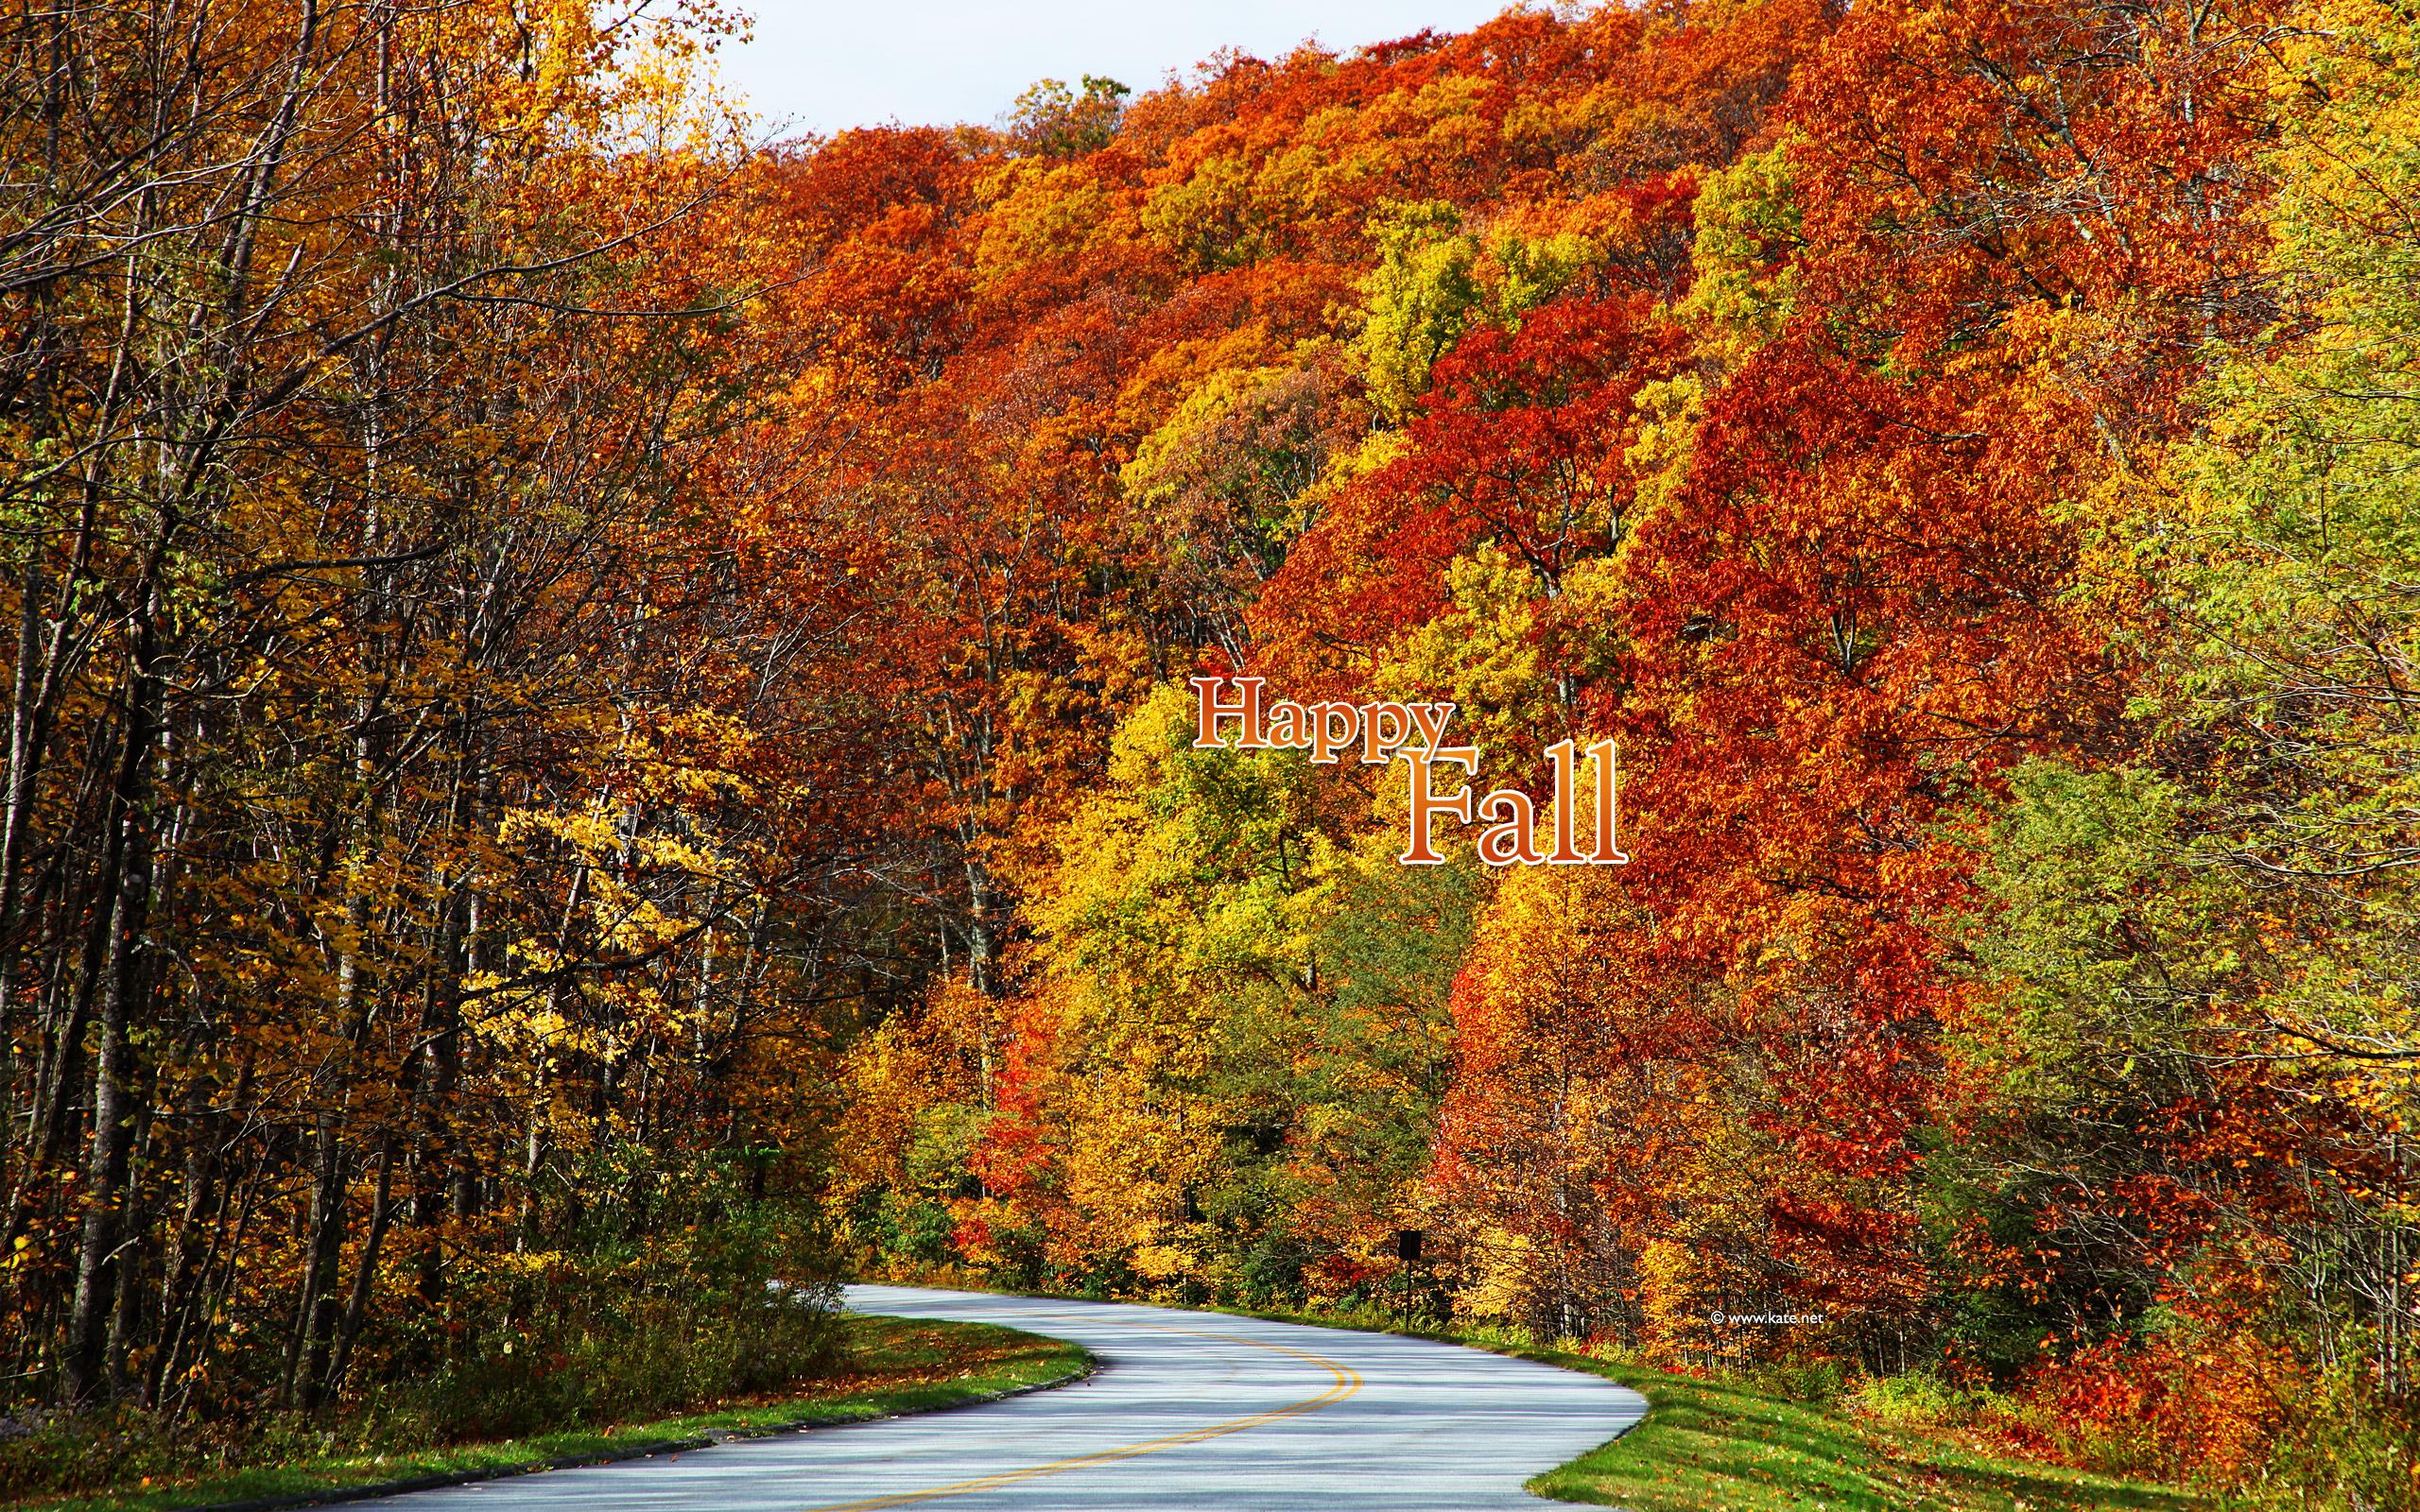 Fall Wallpaper, Fall Facebook Covers, Fall Printables by Kate.net